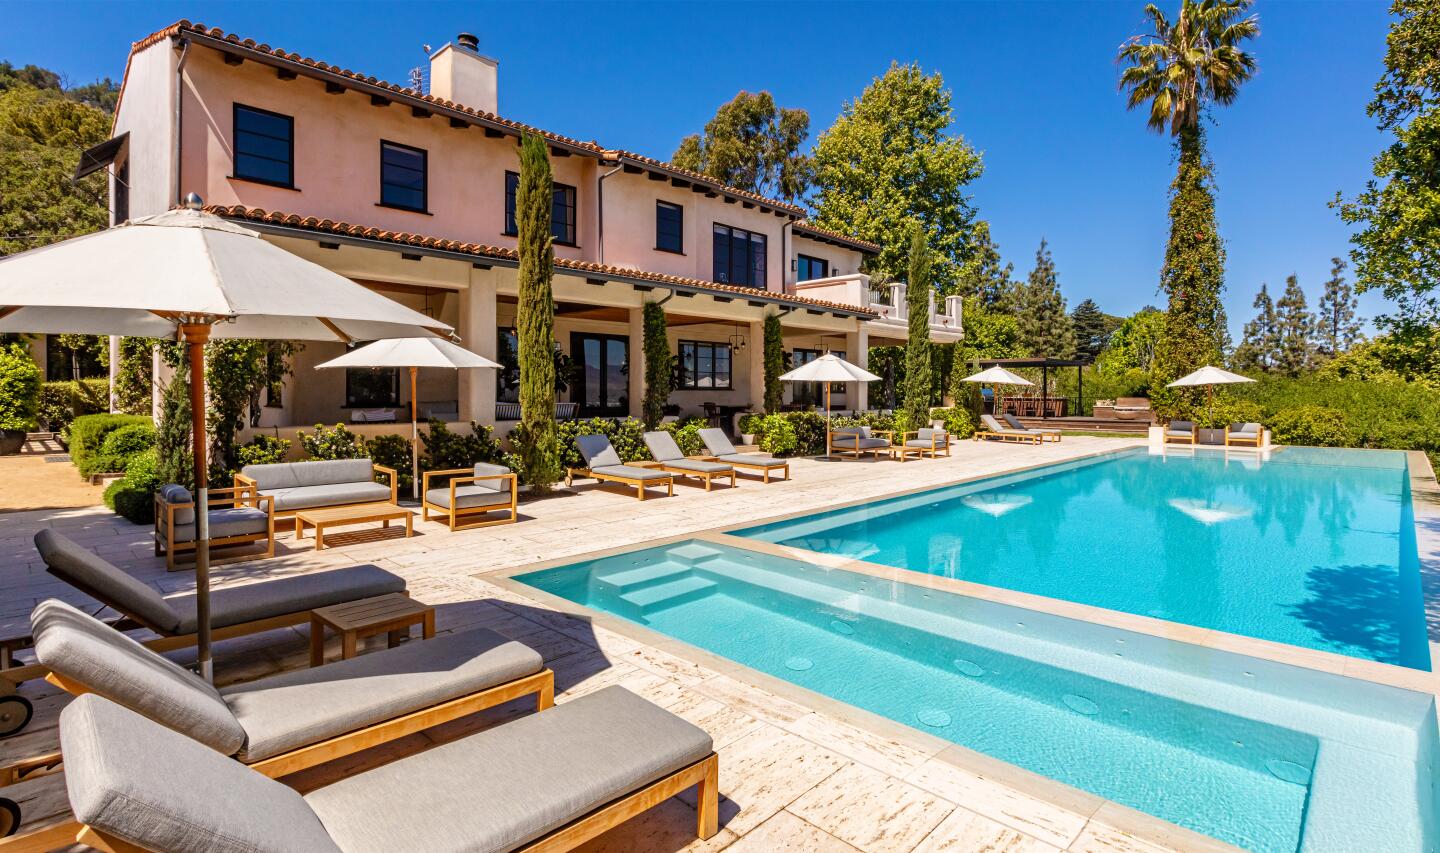 The 10-acre spread includes a Spanish-style villa, a guesthouse, guard house, tennis court and two swimming pools.